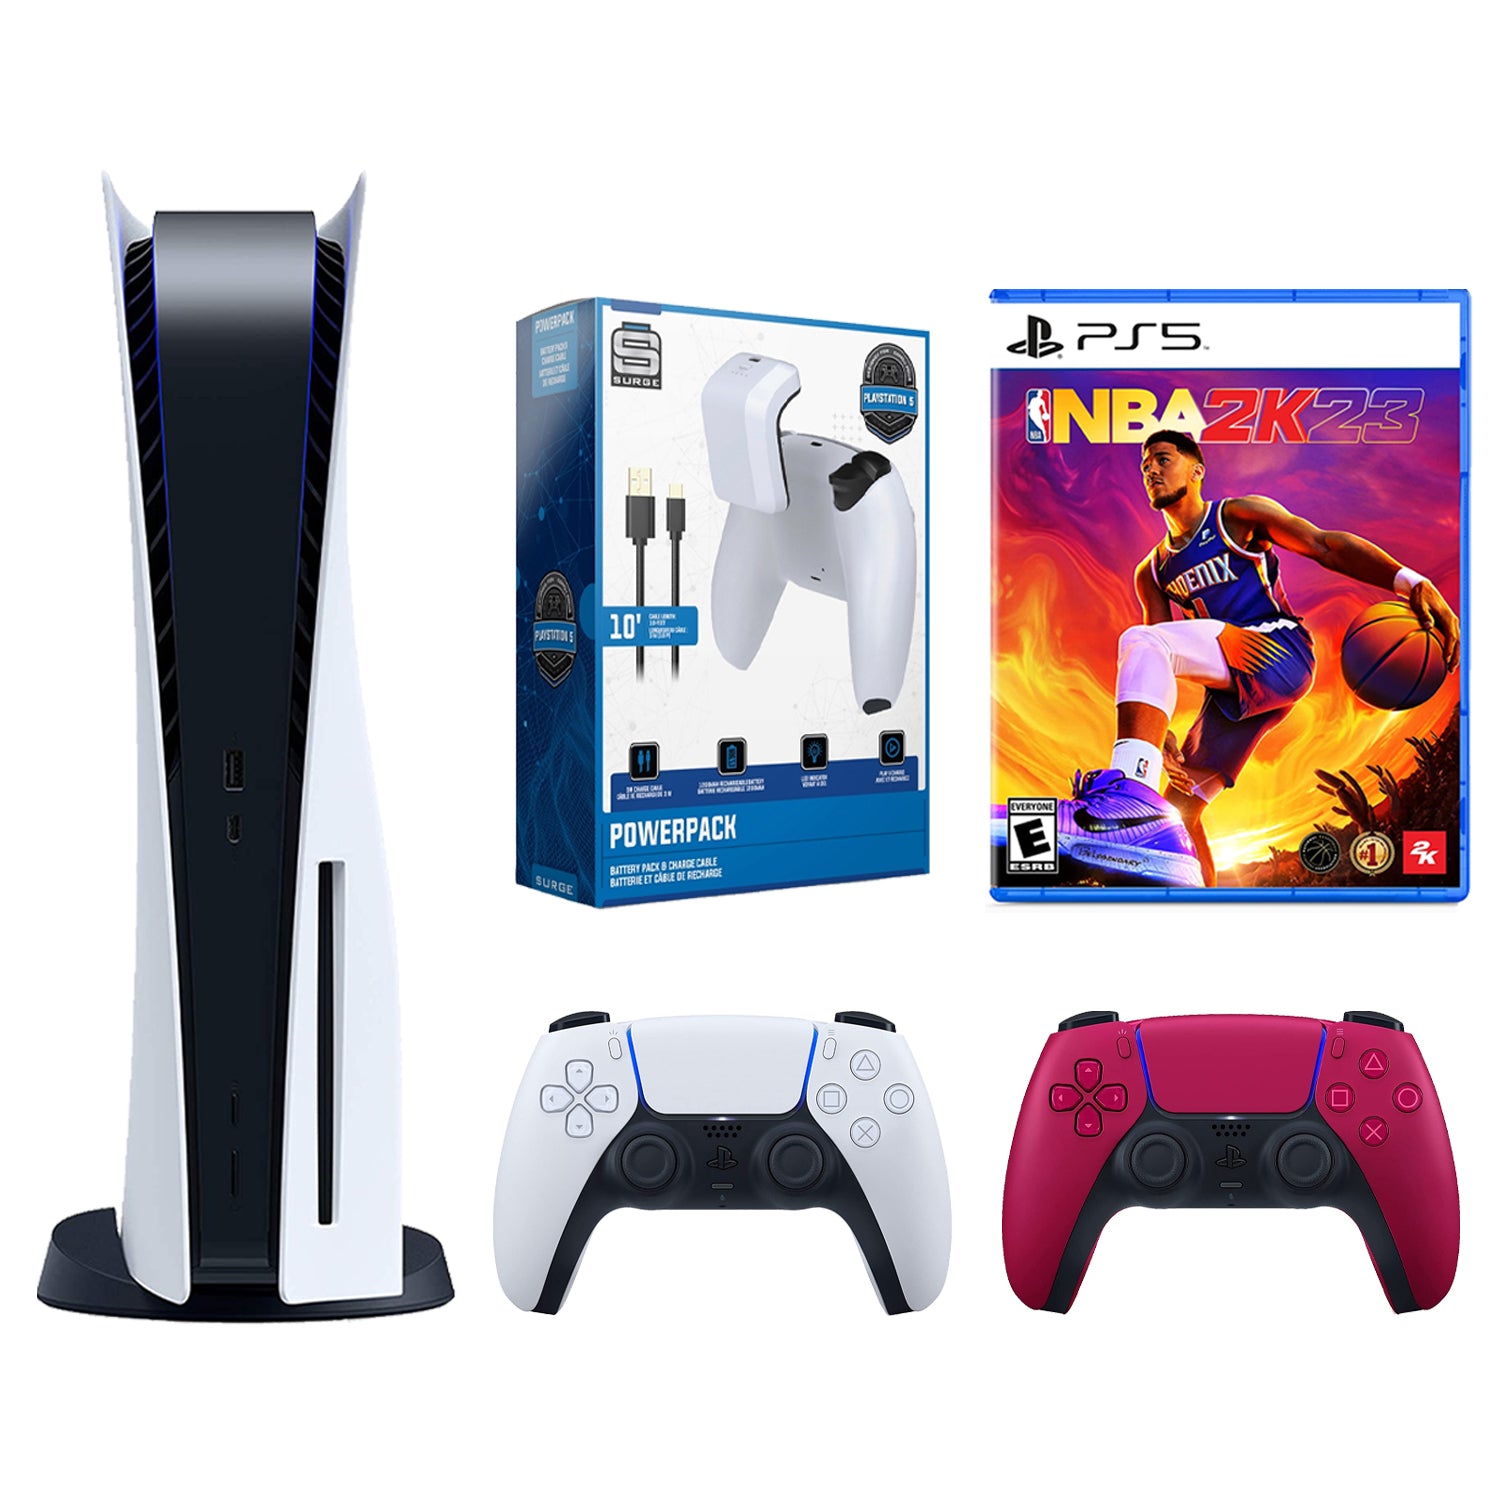 Sony Playstation 5 Disc with NBA 2K23, Extra Controller and Battery Pack Bundle - Cosmic Red - Pro-Distributing